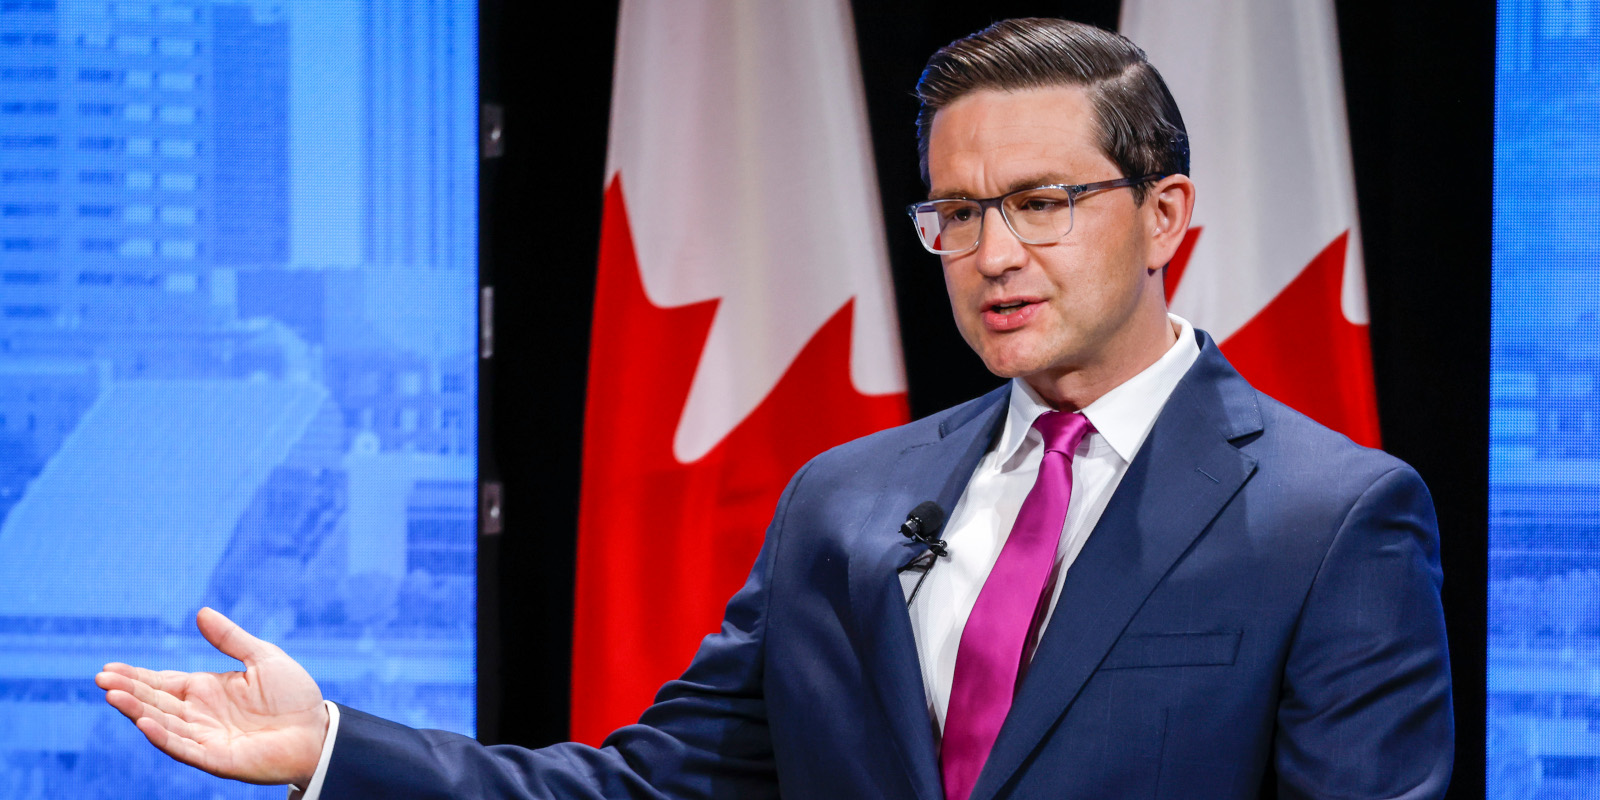 Poilievre says vaccine mandates are based on 'political science' not medical science in conversation with Jordan Peterson - The